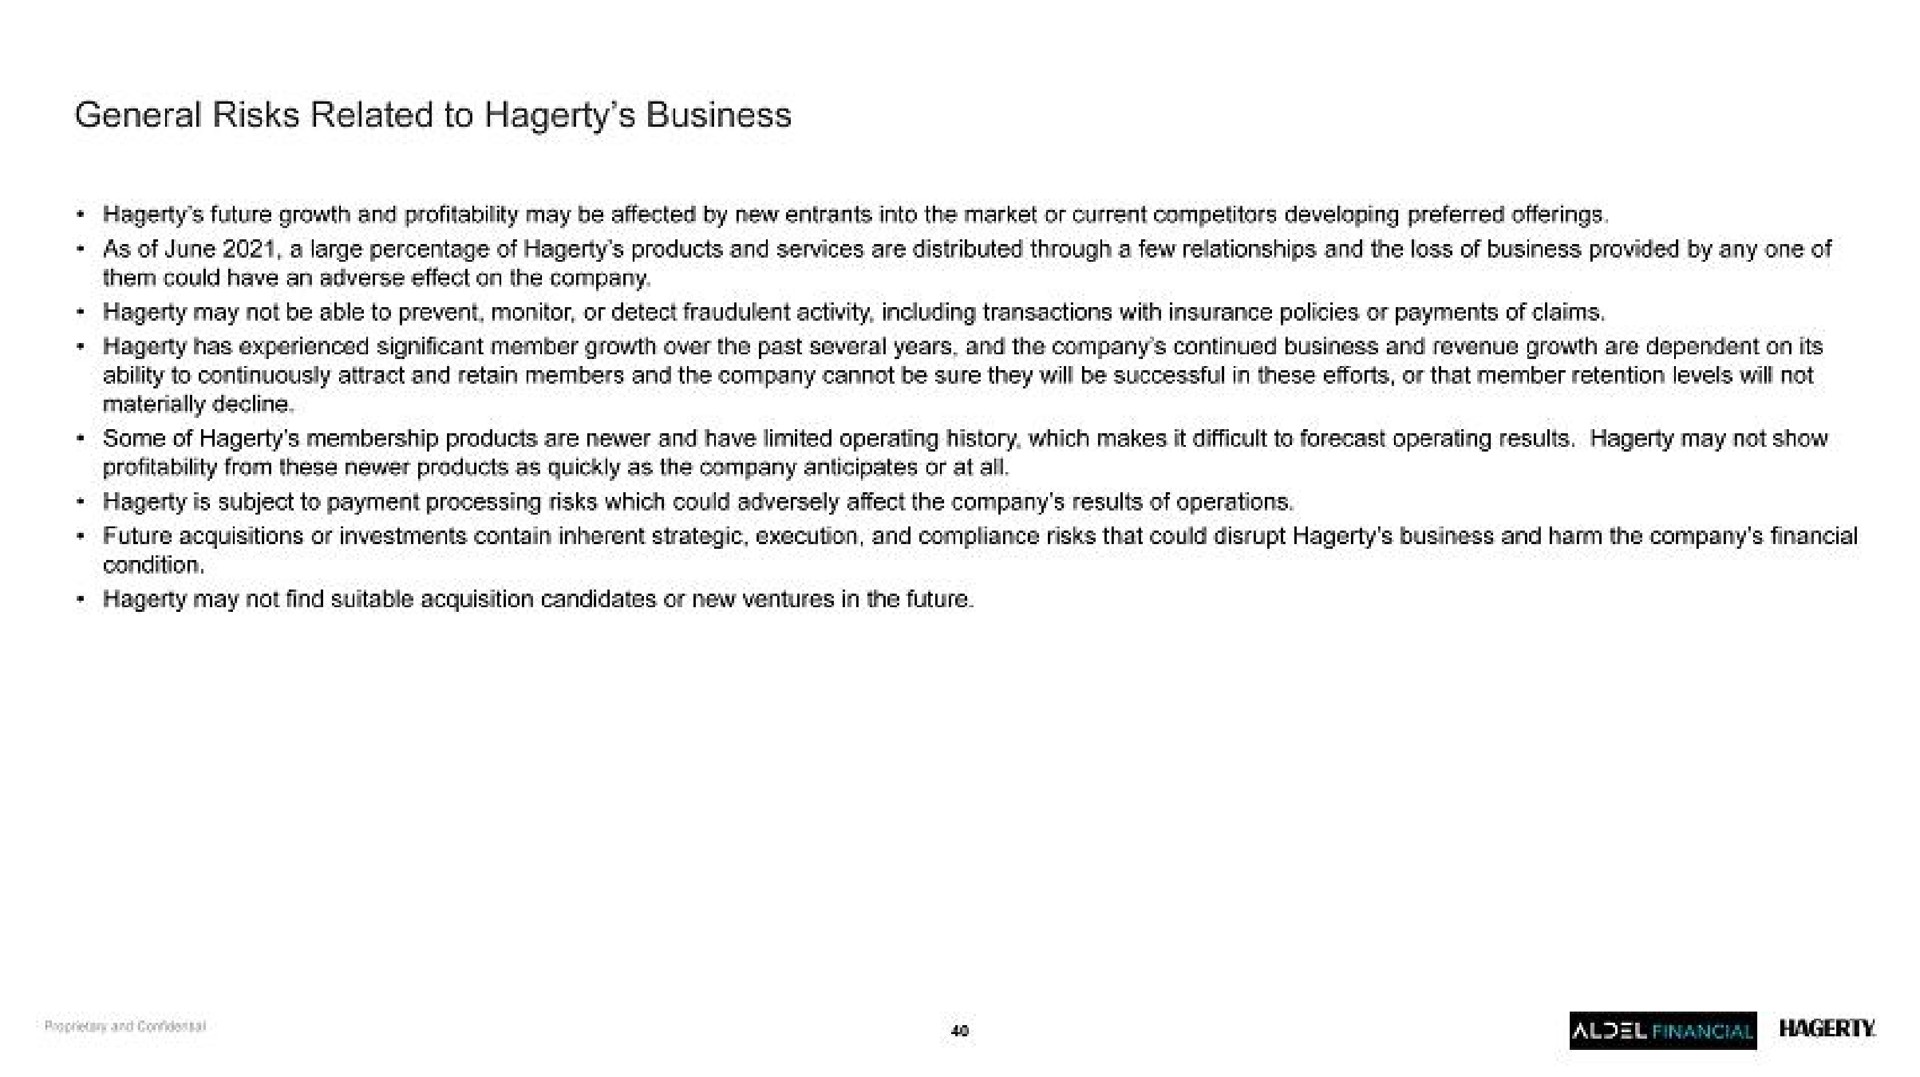 general risks related to business | Hagerty